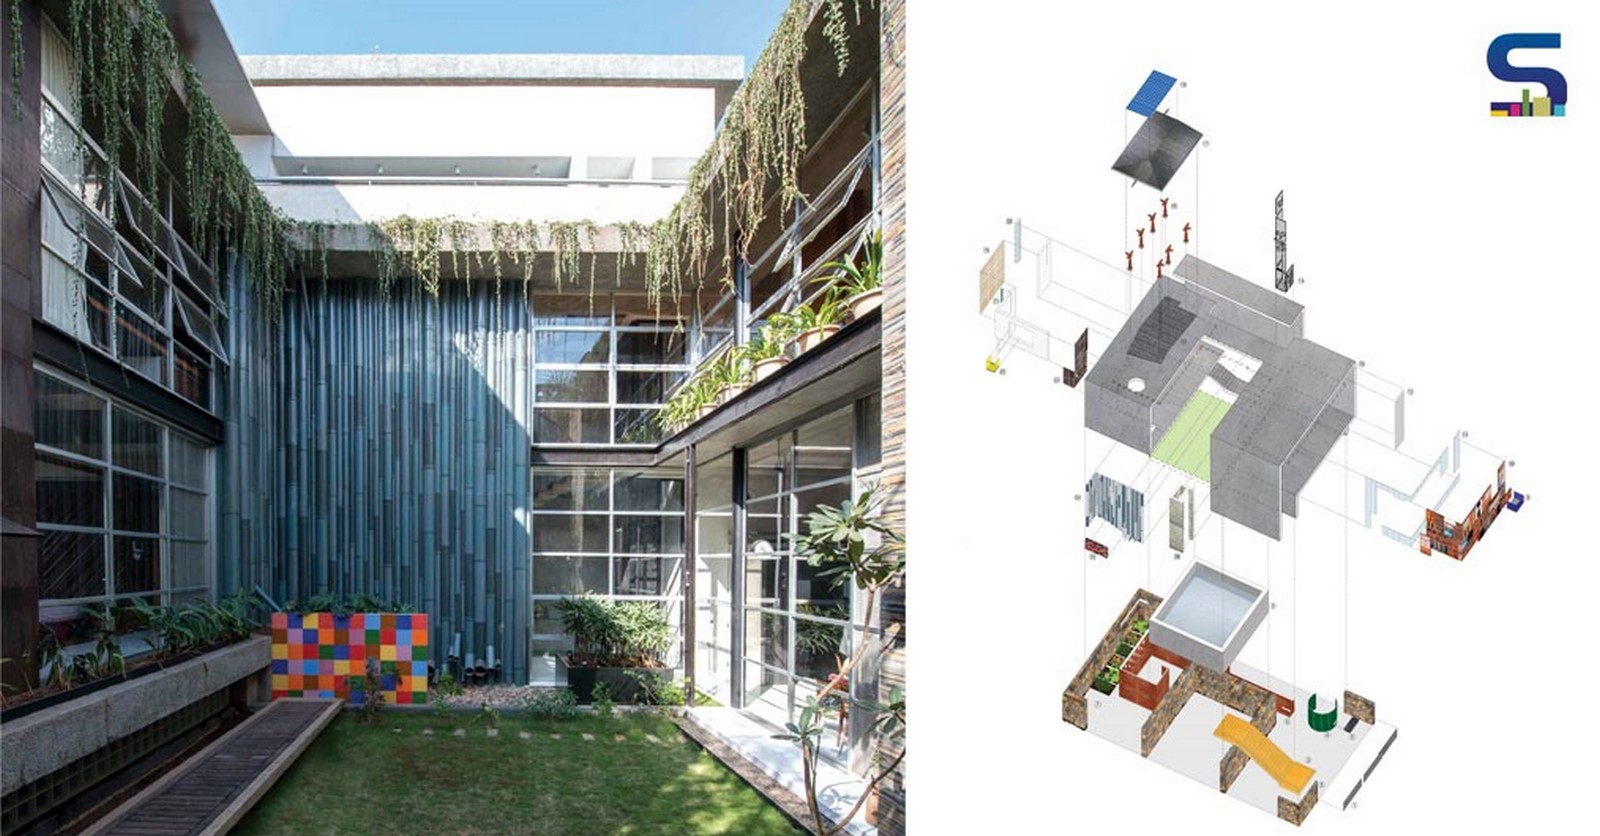 15 architectural projects made out of recycled materials